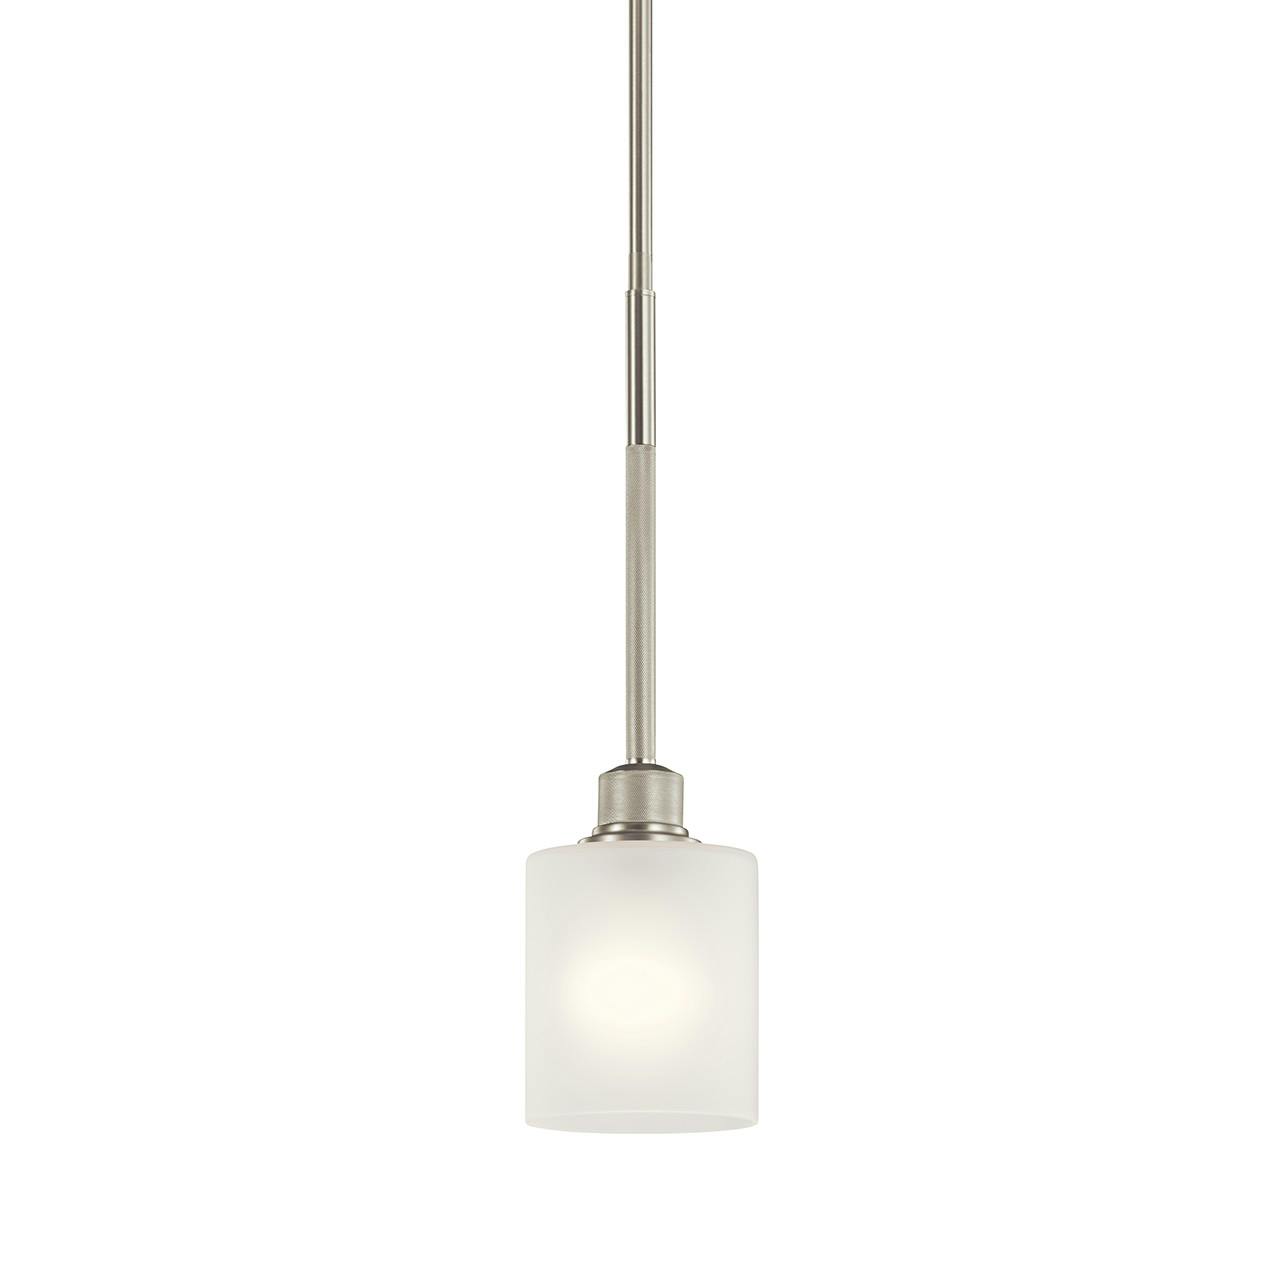 Lynn Haven 1 Light Mini Pendant Nickel without the canopy on a white background